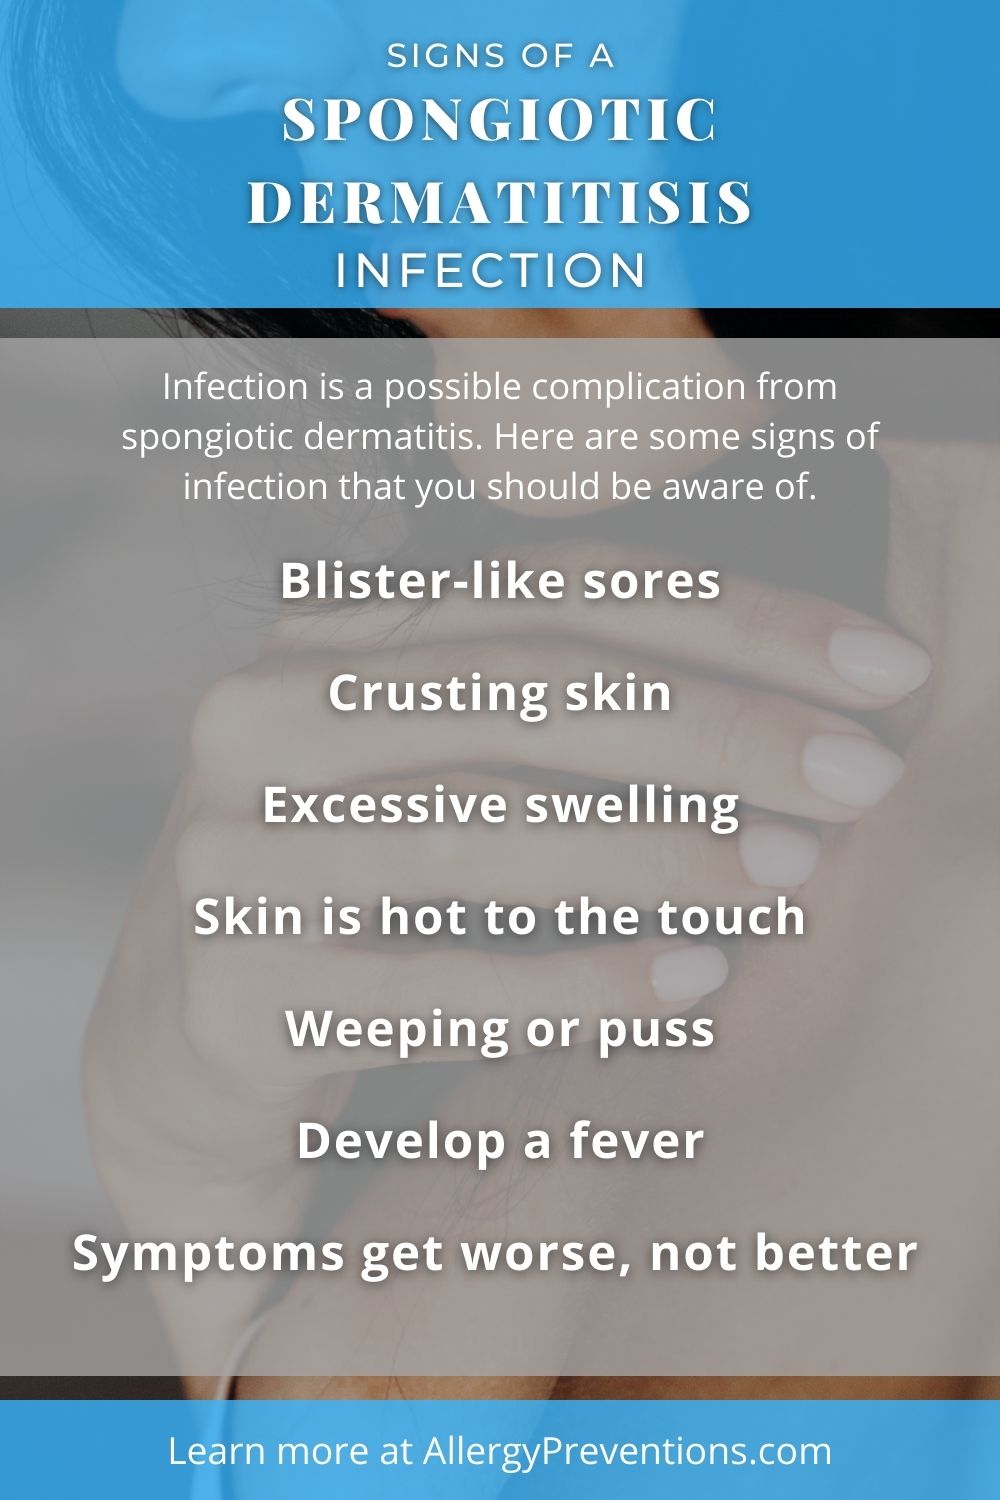 signs of a spongiotic dermatitis (SD) infection infographic. Signs and symptoms to be aware of. Blister-like sores Crusting skin Excessive swelling Skin is hot to the touch Weeping or puss Develop a fever Symptoms get worse, not better. allergypreventions.com